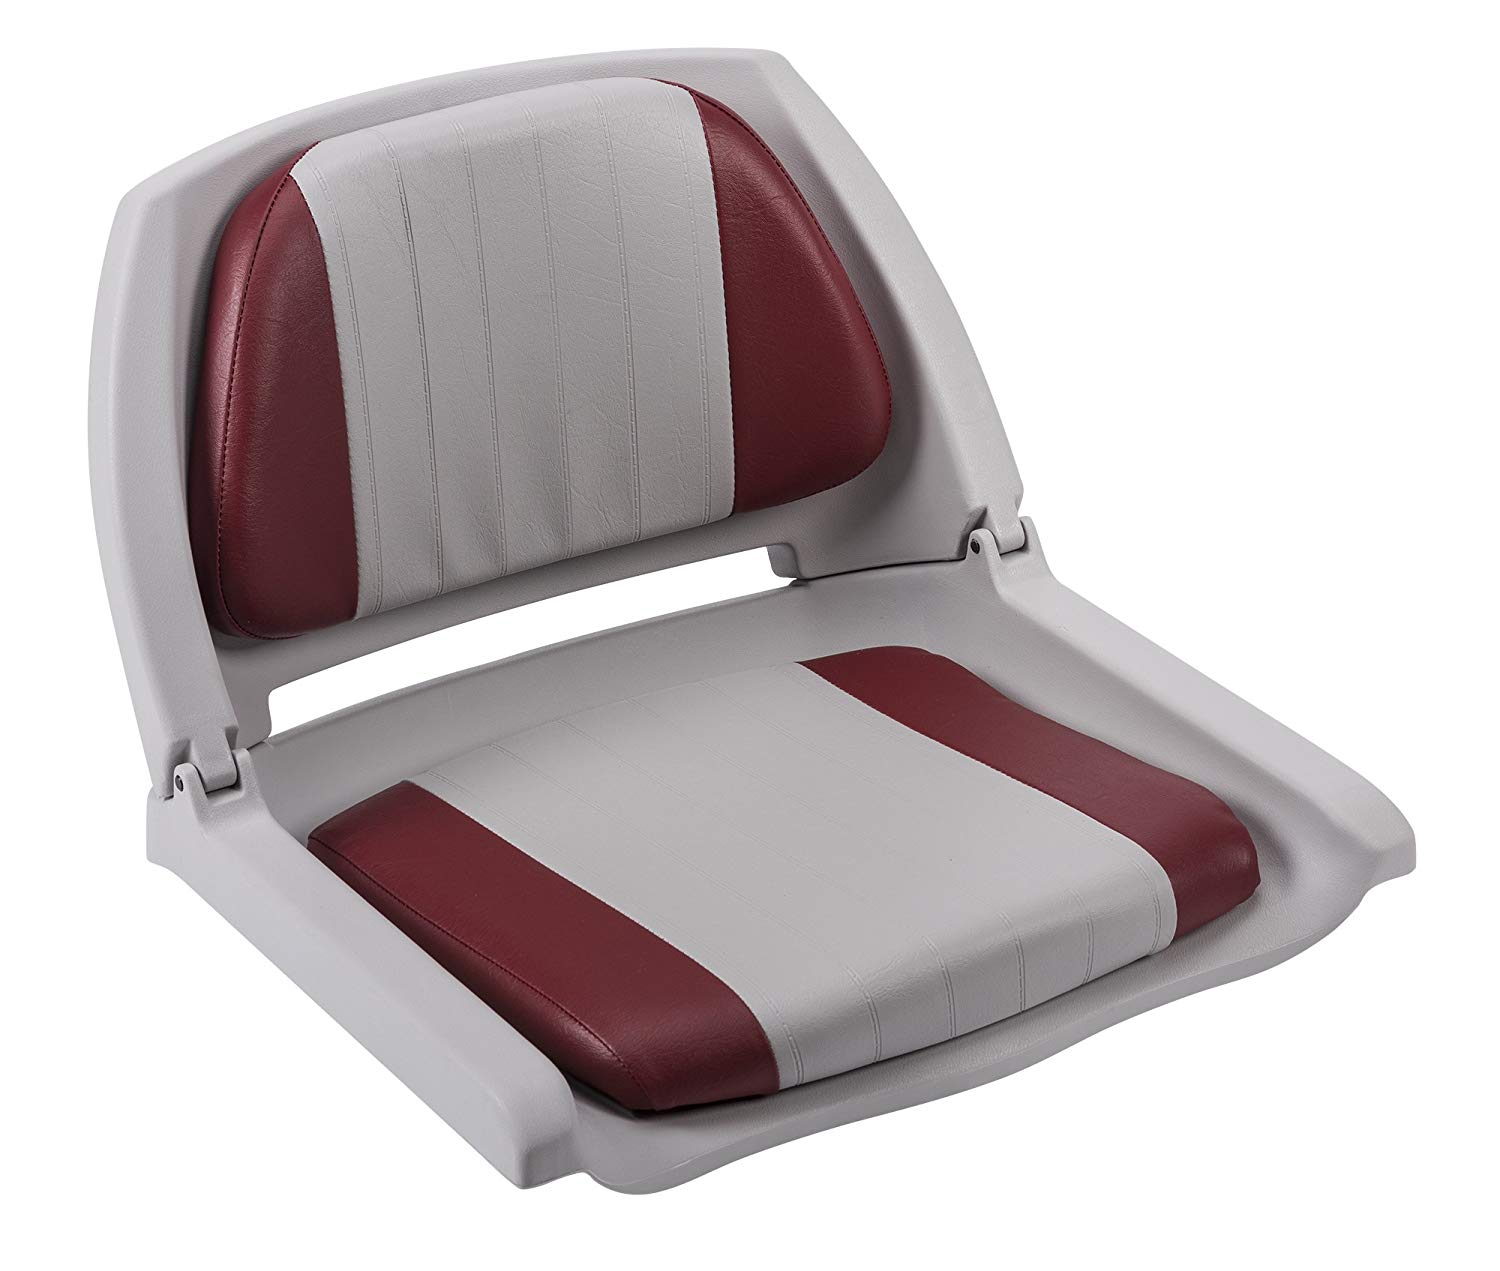 Wise 8WD139 Series Molded Fishing Boat Seat with Marine Grade Cushion Pads